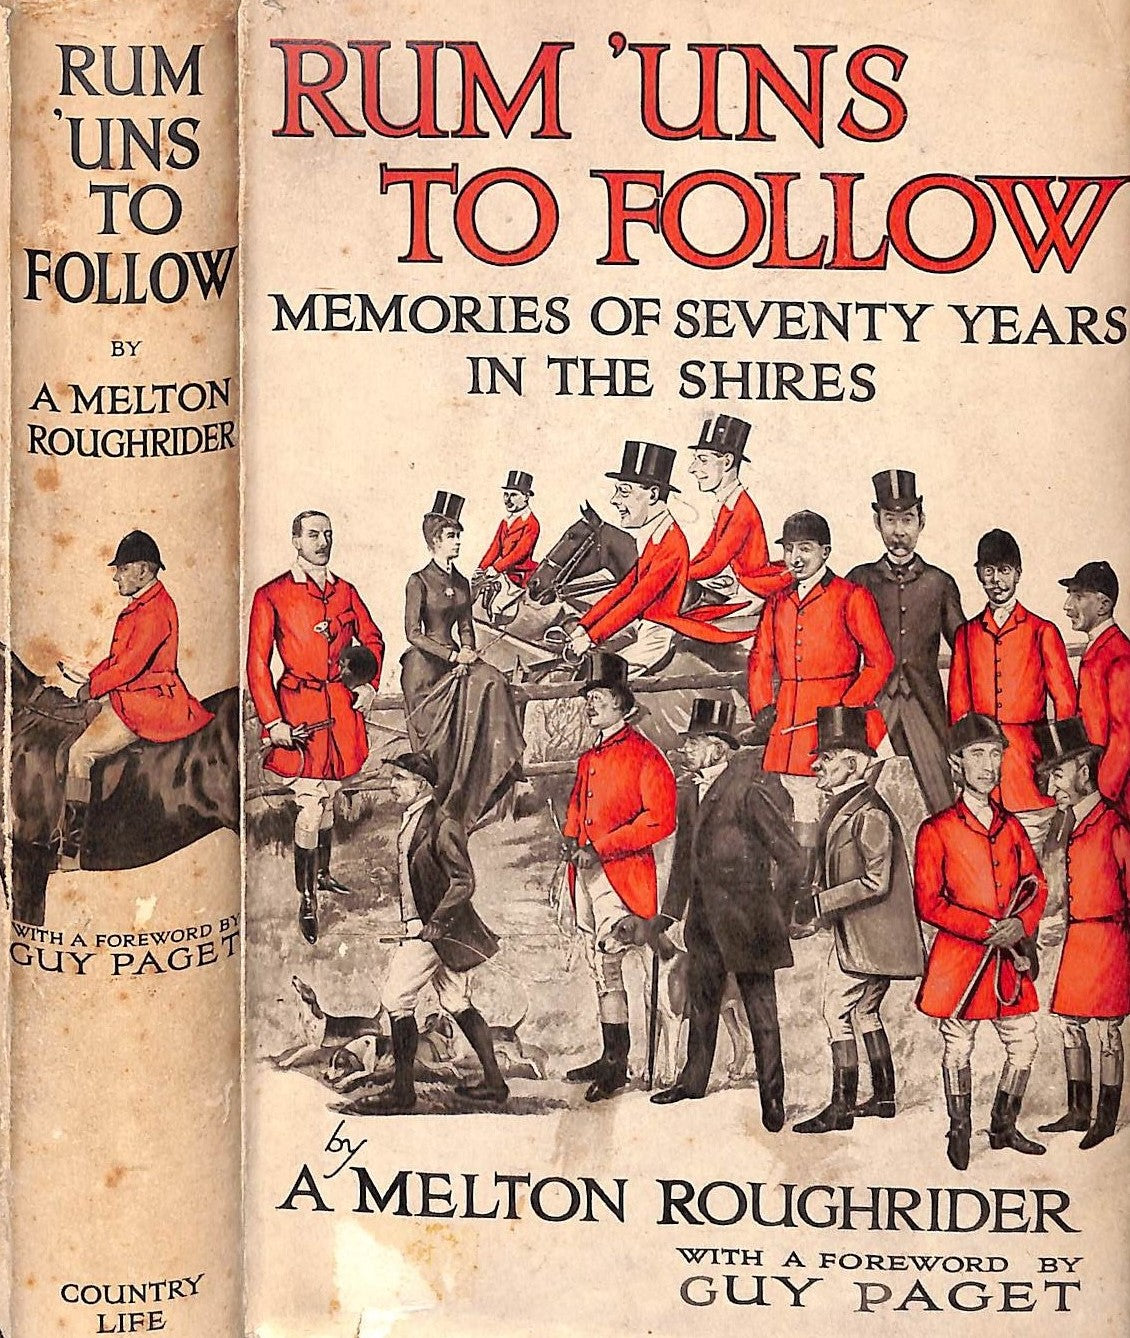 "Rum 'Uns to Follow: Memories of Seventy Years in the Shires" A Melton Roughrider, Guy Paget